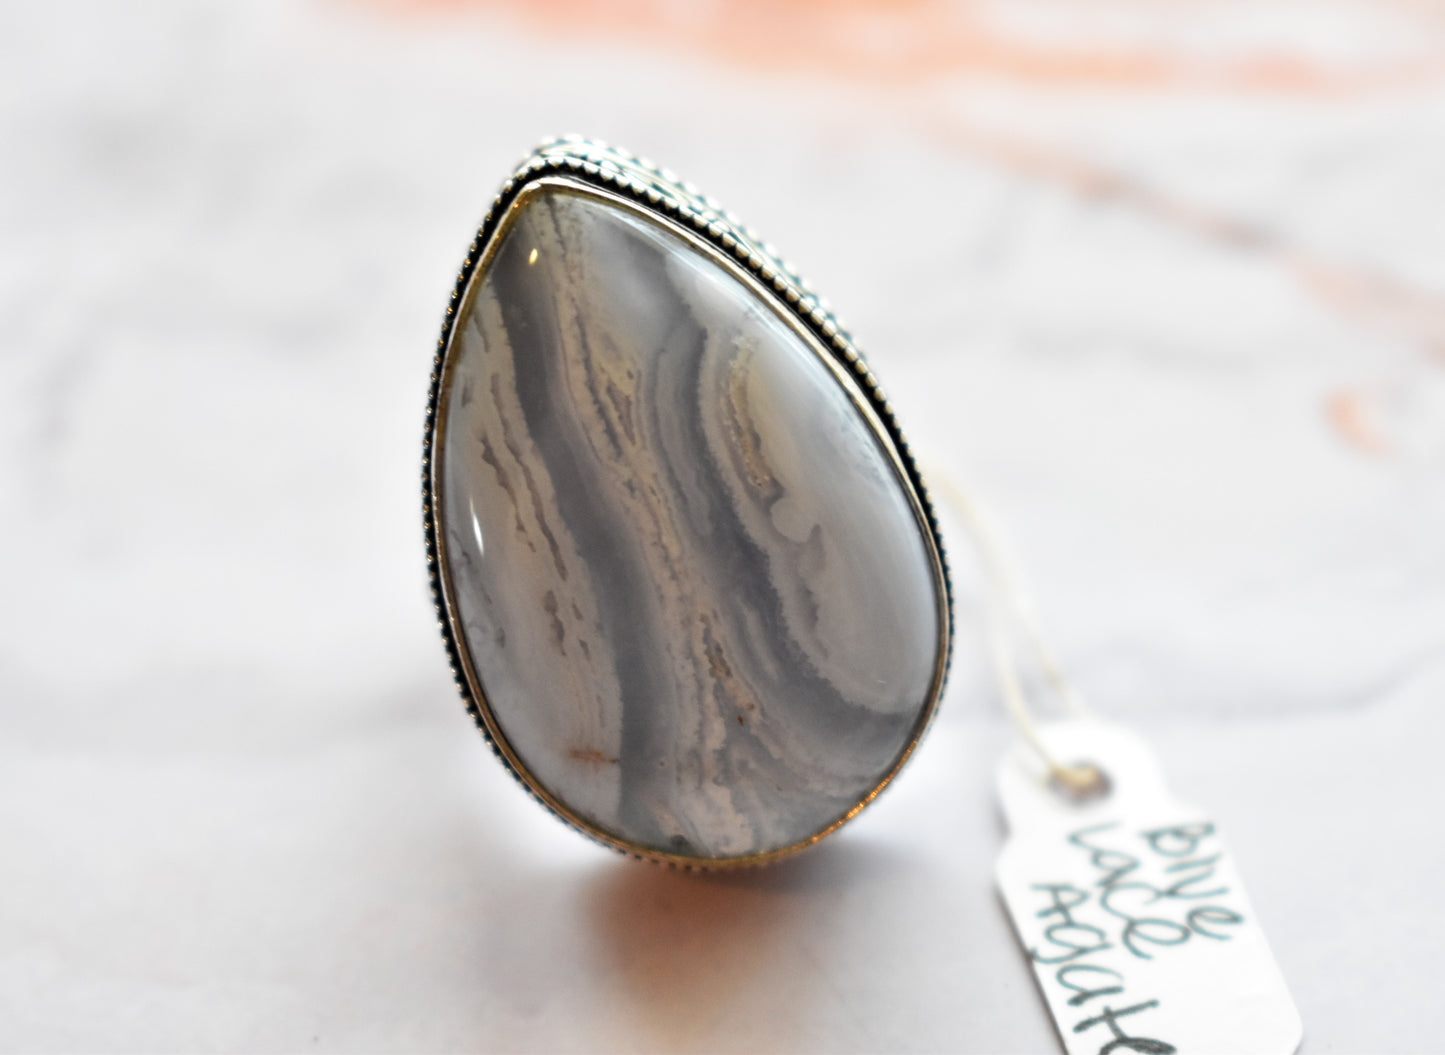 stones-of-transformation - Blue Lace Agate Ring (Size 8) - Stones of Transformation - 